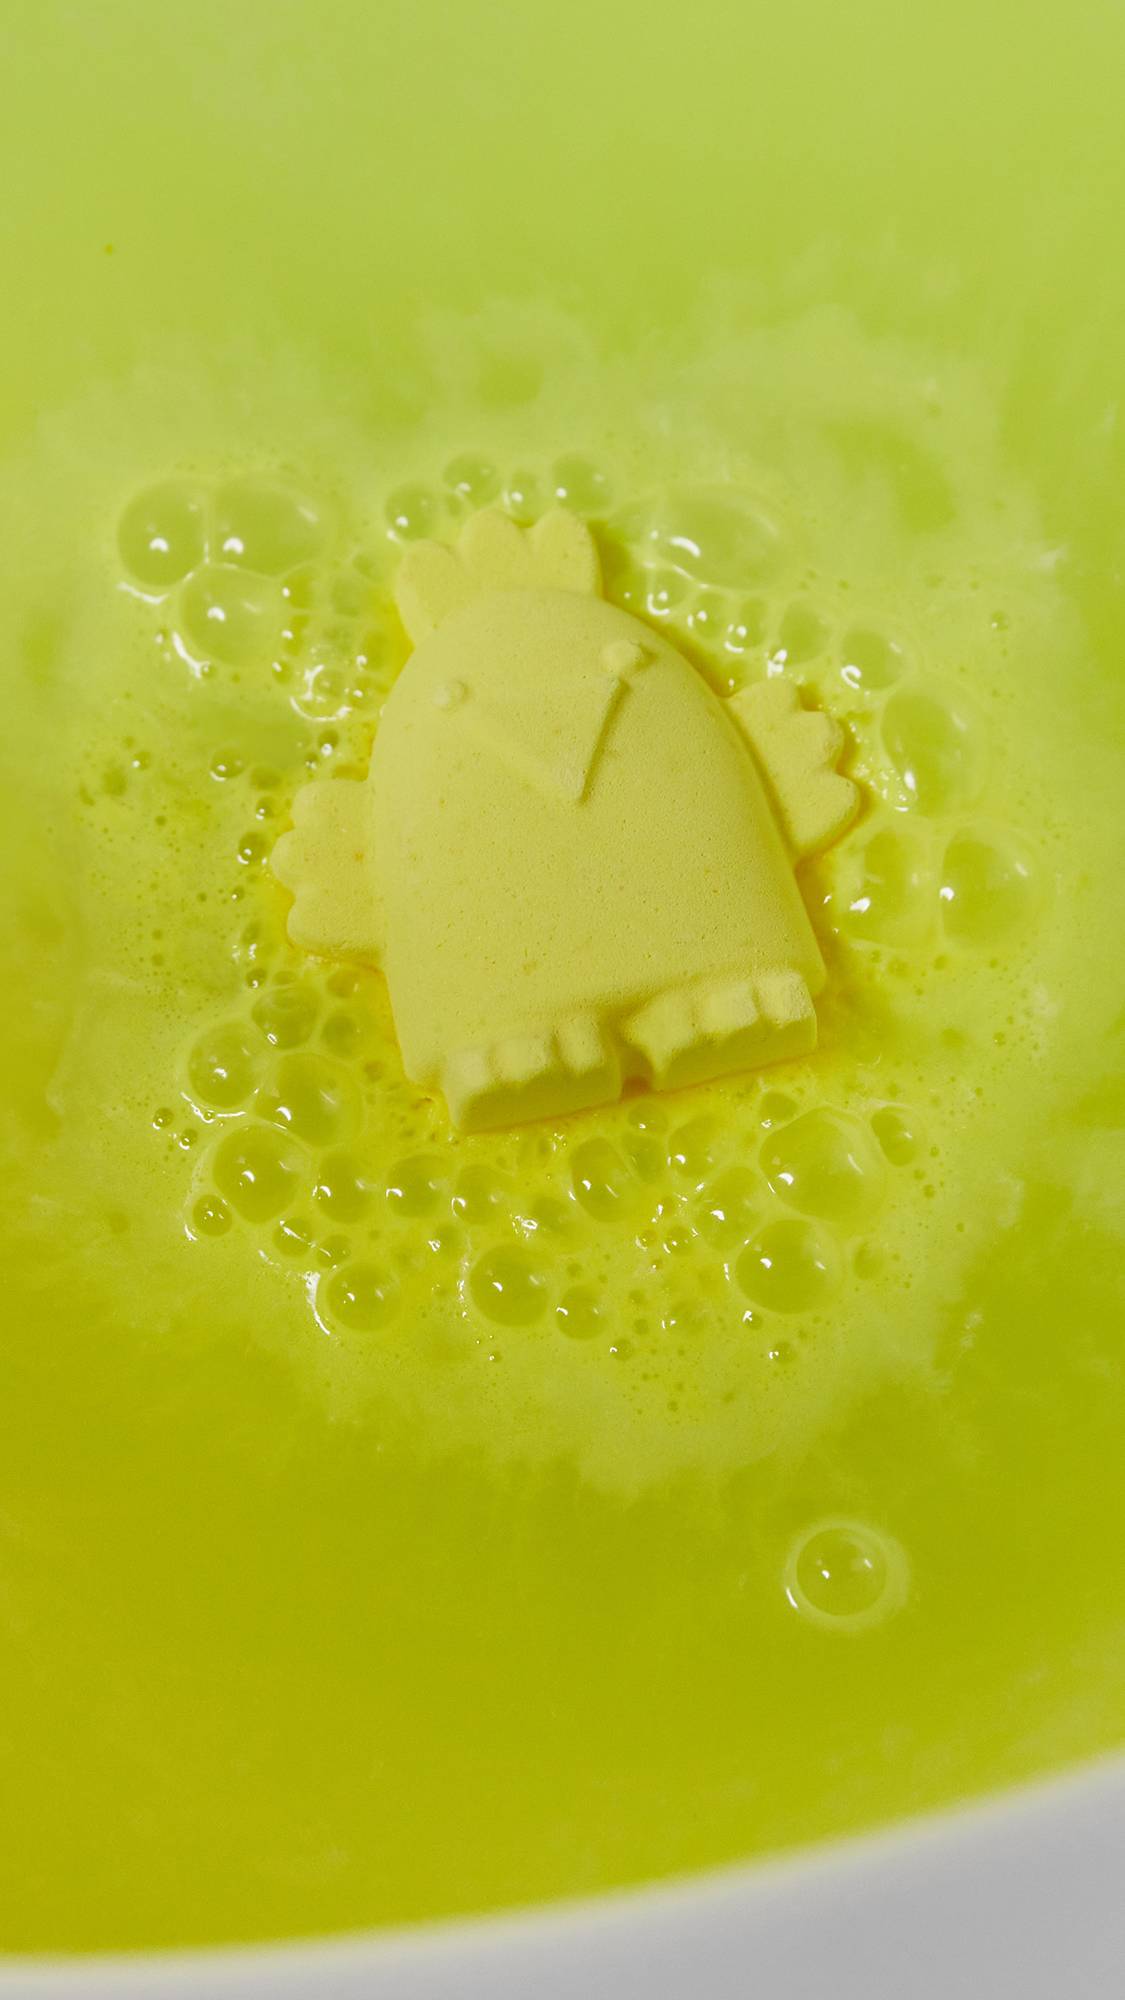 The Cheep Cheep bath bomb sits on top of the water fizzing bright, neon yellow foam.